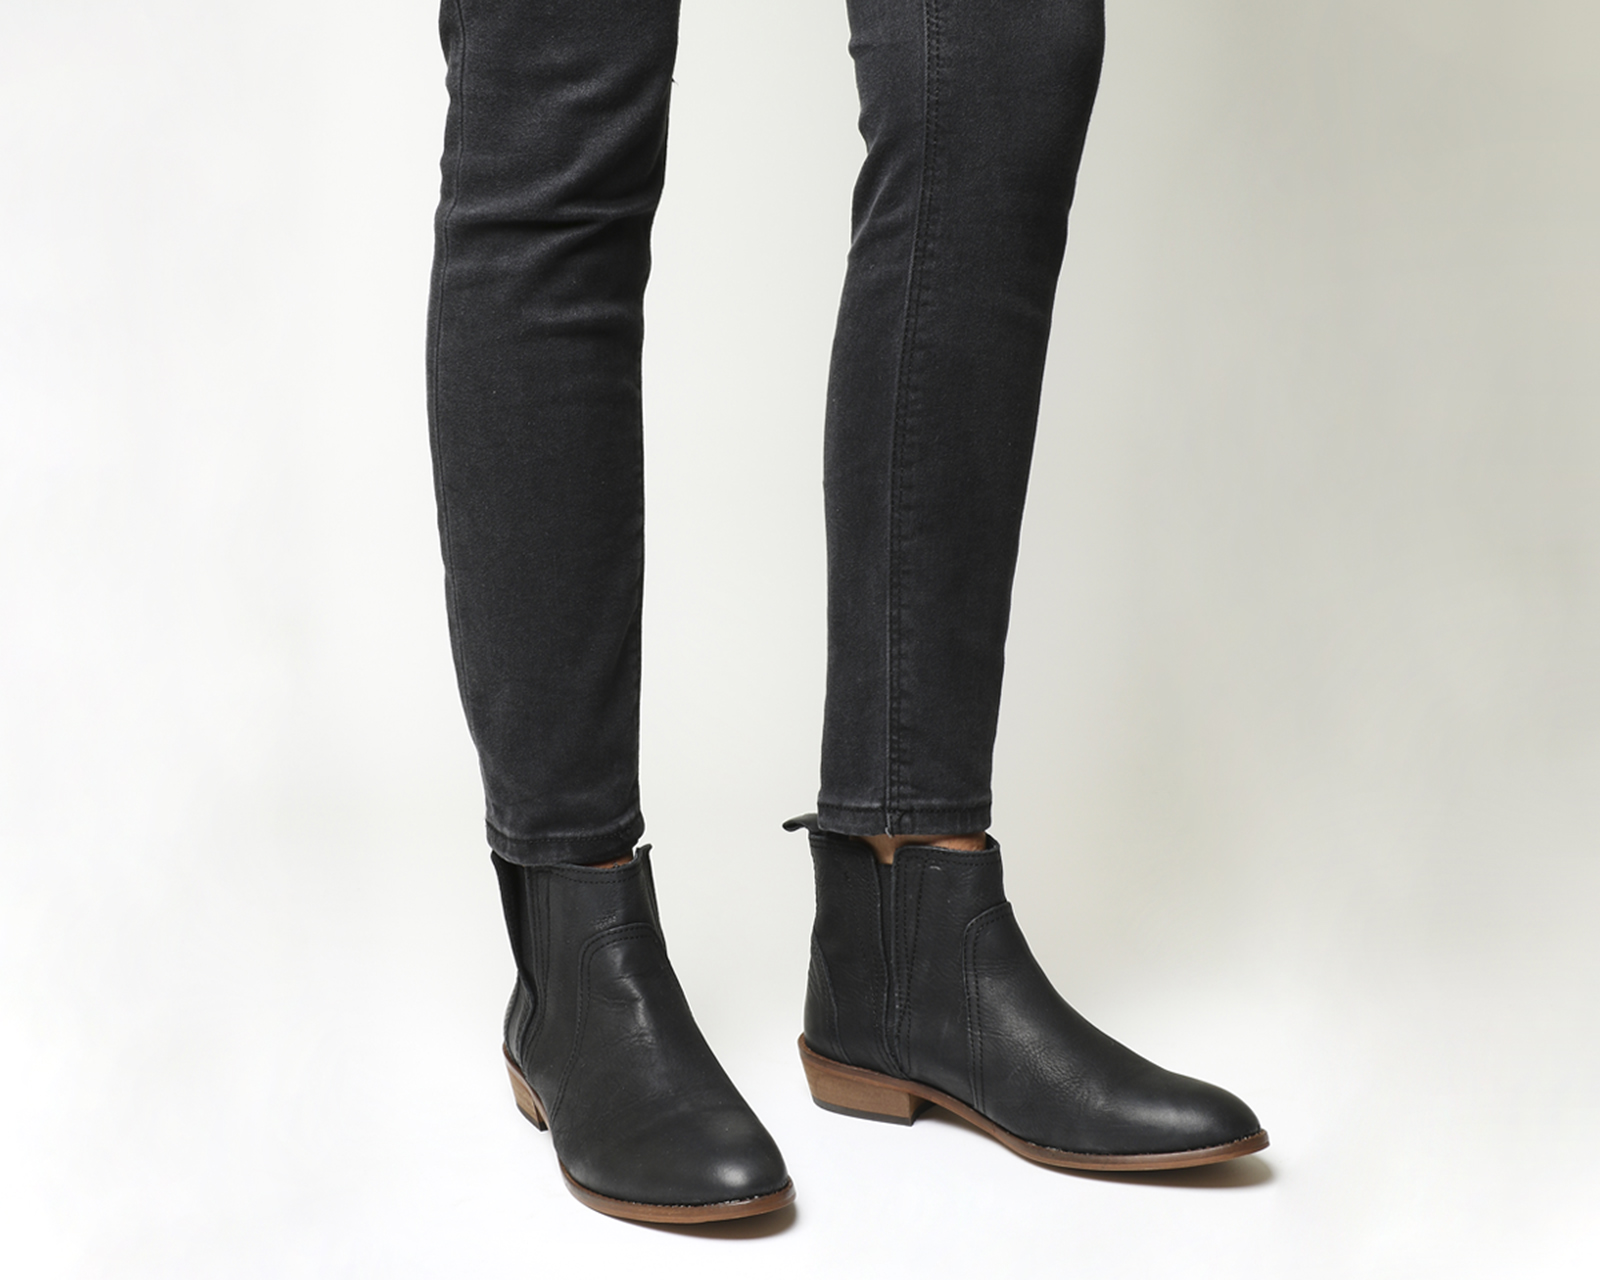 OFFICELone Ranger Casual BootsBlack Leather